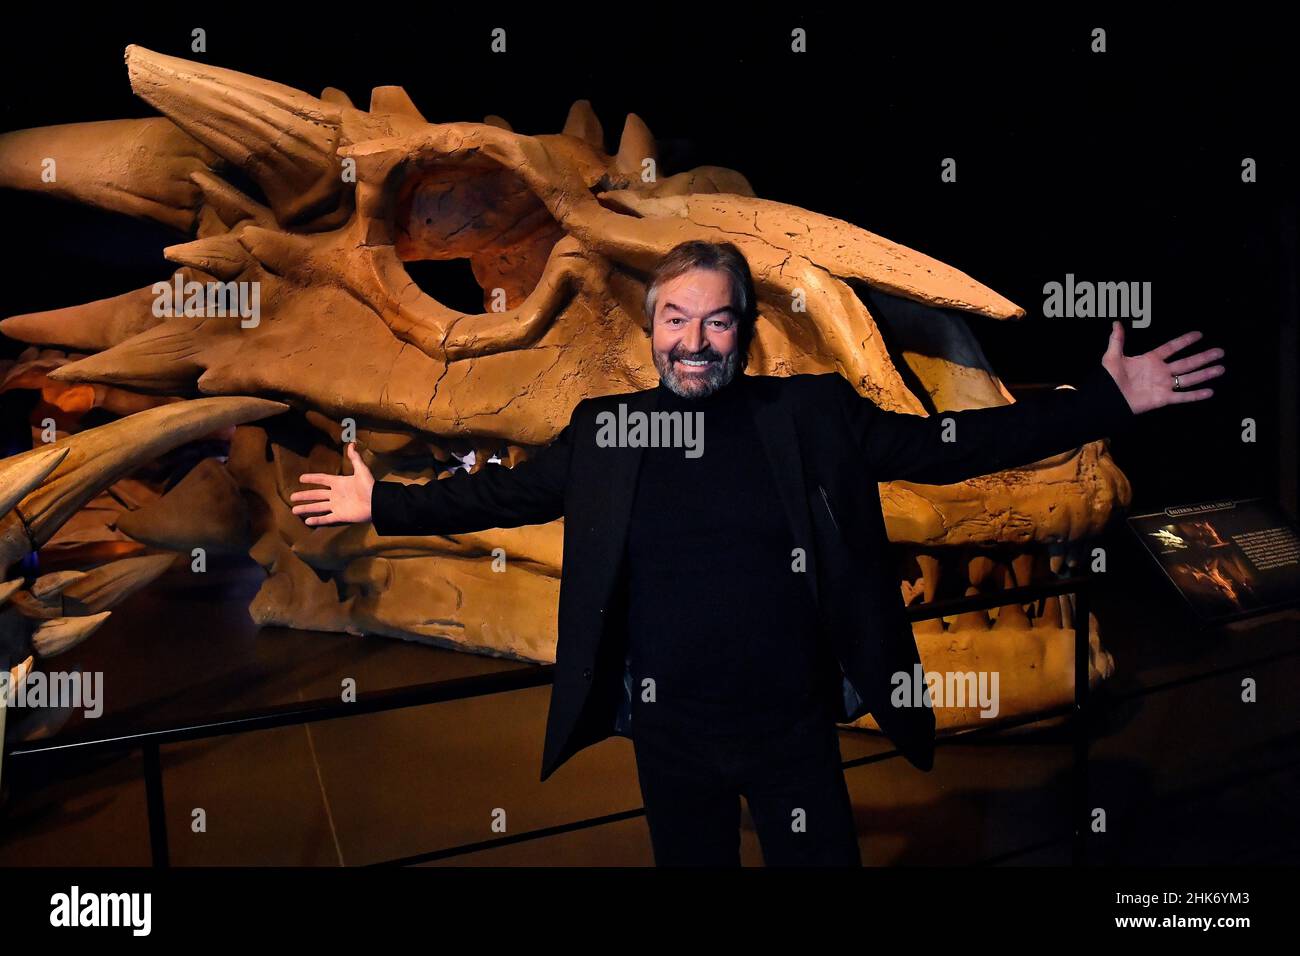 Actor Ian Beattie, who plays Meryn Trant in the TV show Game of Thrones, poses for a photograph in front of the skull of Drogon, one of the dragons from Westeros, during the media preview day for the opening of the new Game of Thrones studio tour at Linen Mill Studios in Banbridge, Northern Ireland, February 2, 2022. REUTERS/Clodagh Kilcoyne Stock Photo